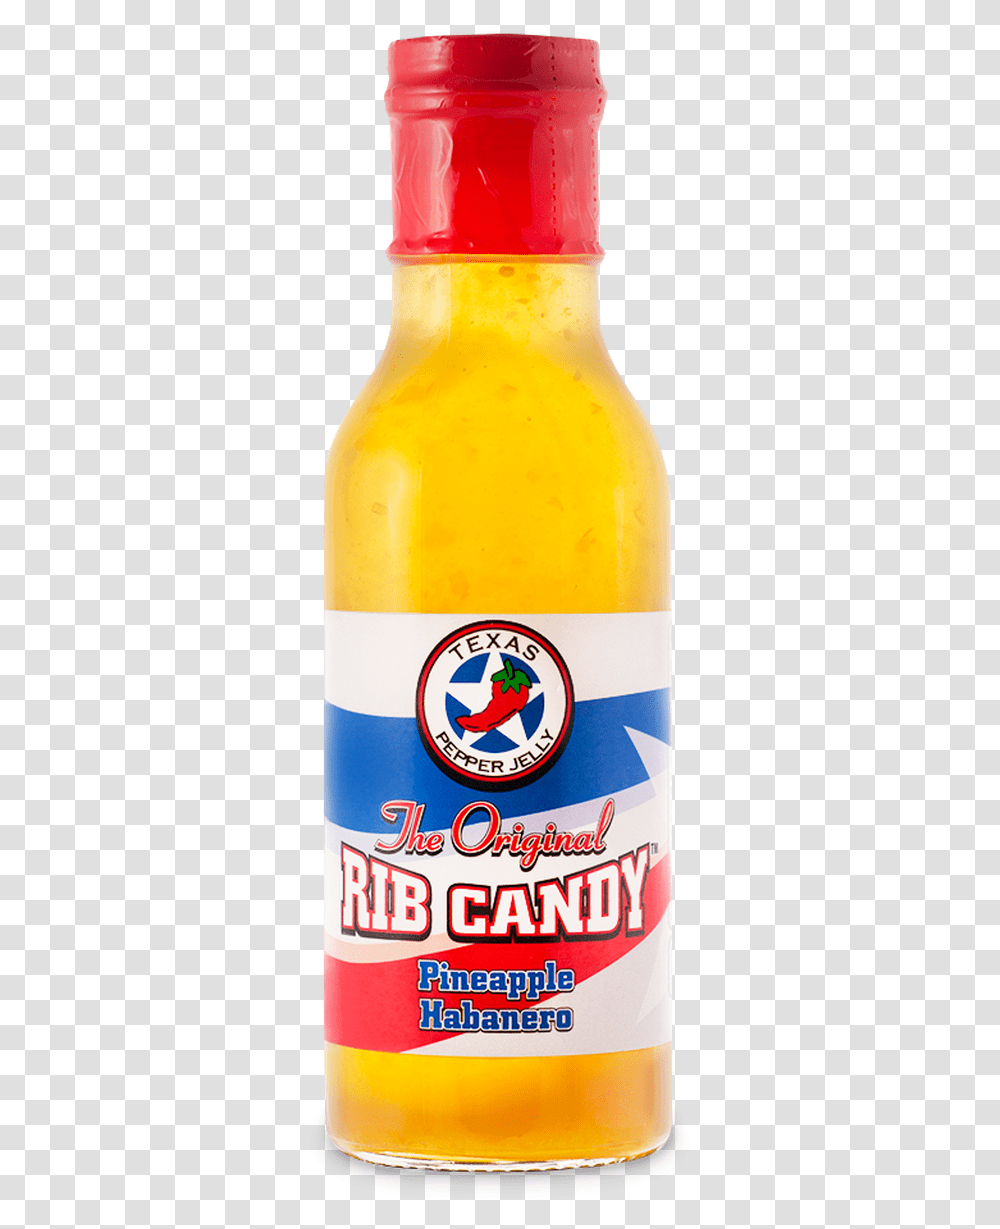 Rib Candy Pineapple Habanero, Beverage, Drink, Beer, Alcohol Transparent Png